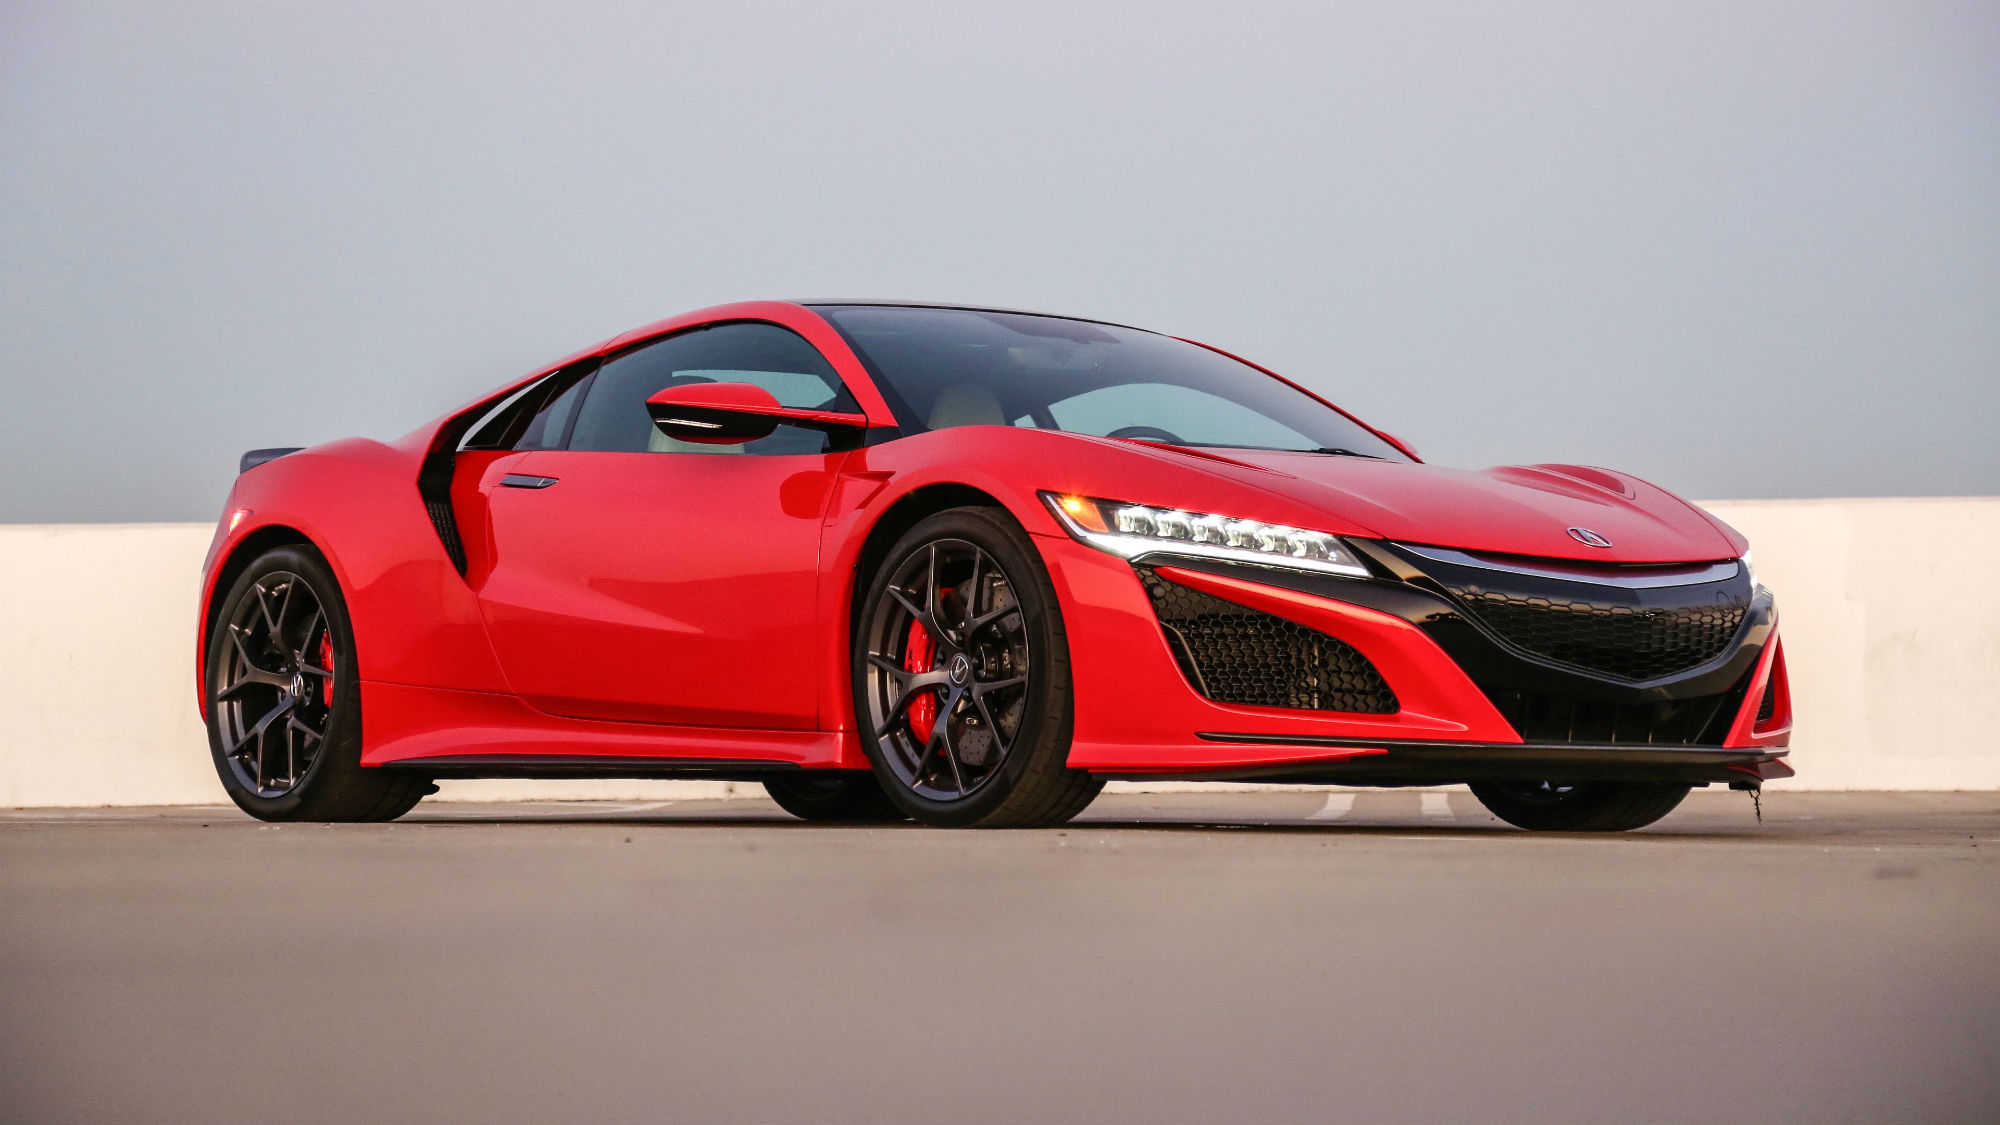 2017 Acura NSX Review: Is It a Super Car? - The Manual